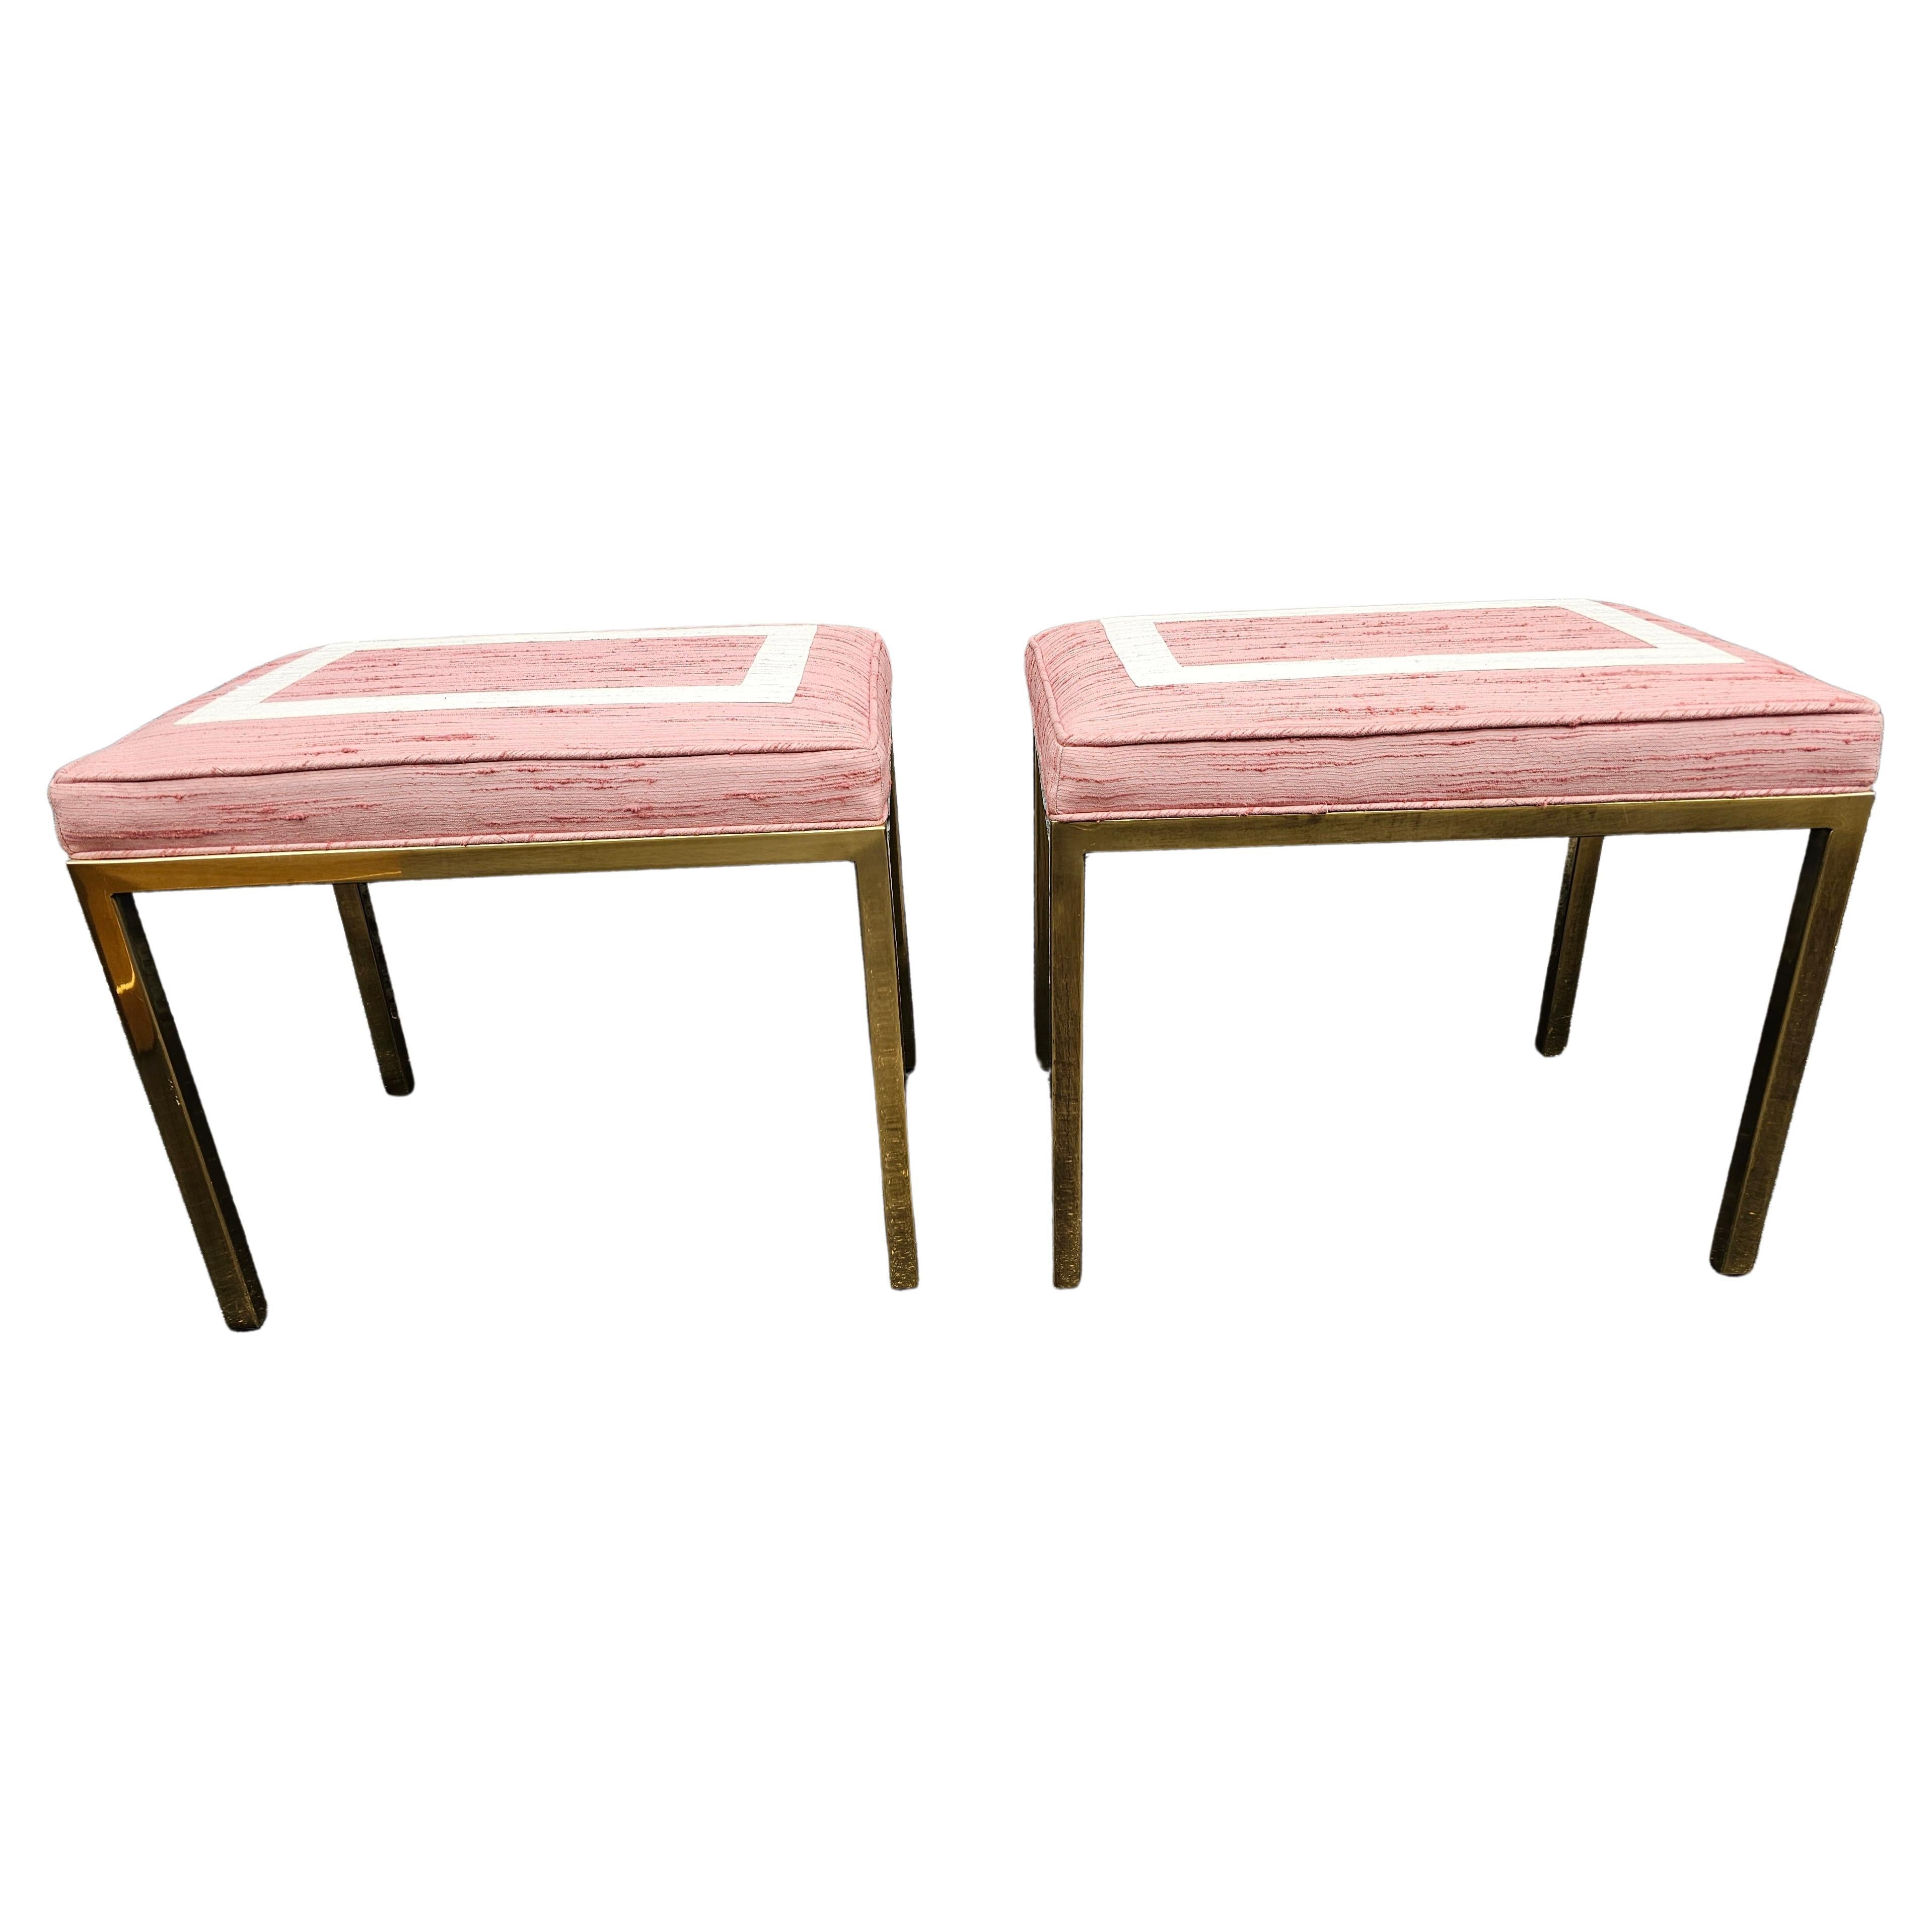 Pair of Contemporary Brass And Upholstered benches / Stools / Footstools attributed to Mastercraft of Grand Rapids, Michigan. Recently reuphostered. Clean and very solid.   Polished brass
Measures 22